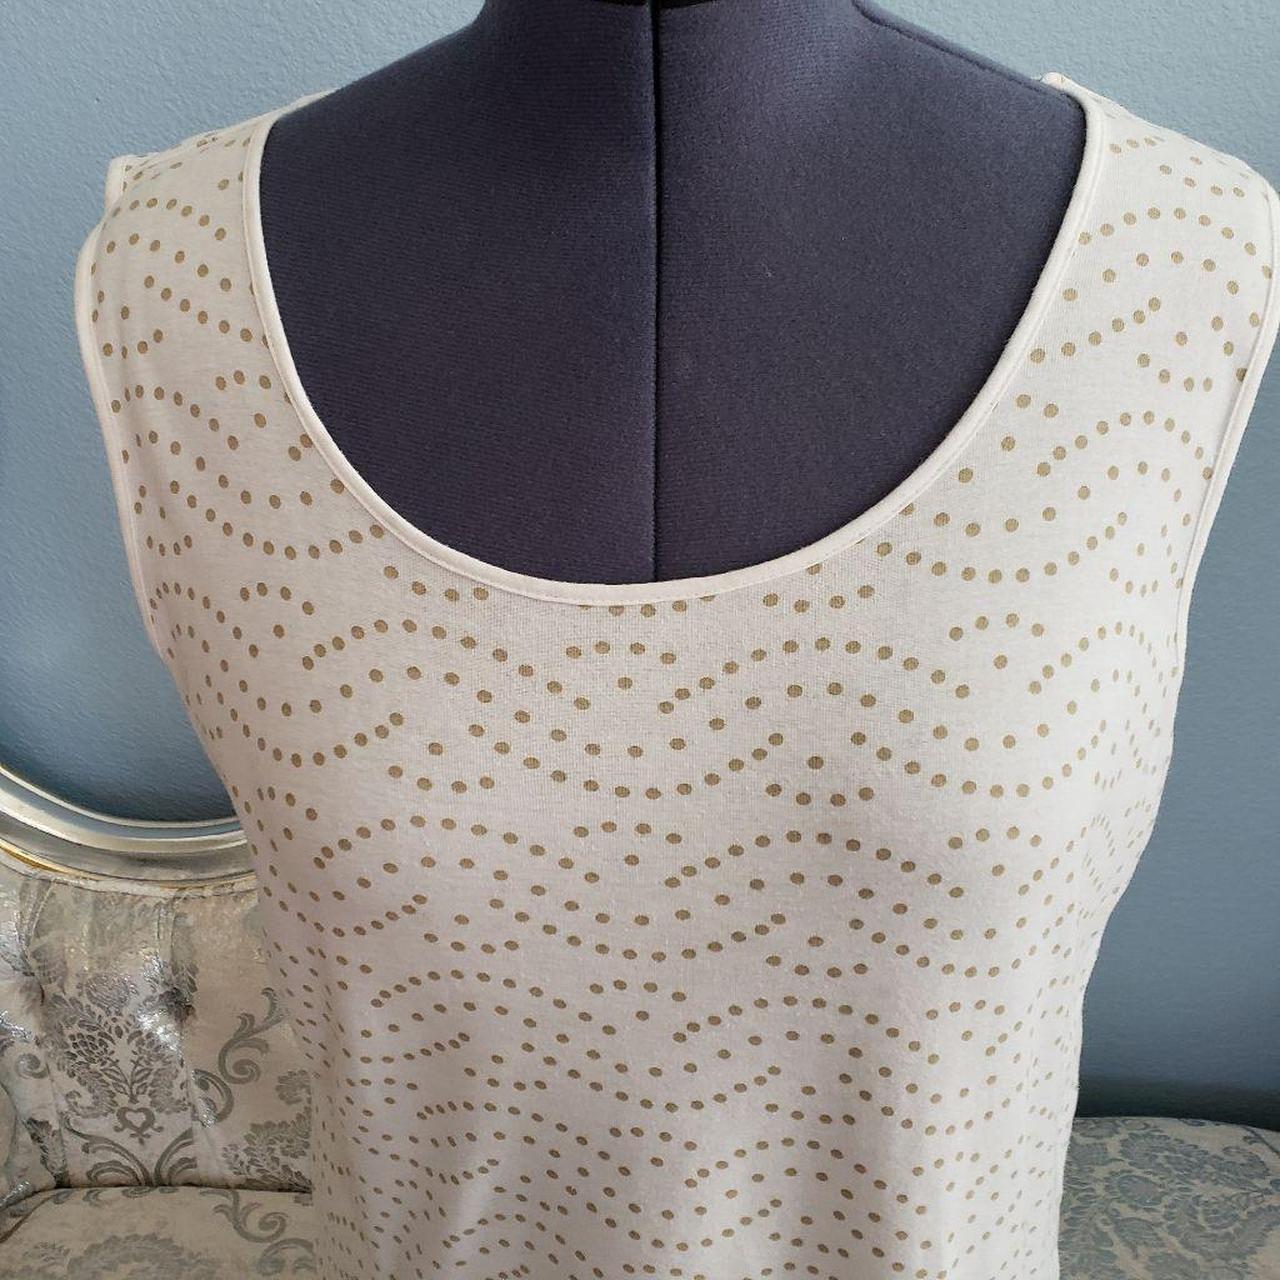 Product Image 1 - EUC women's white with patterned